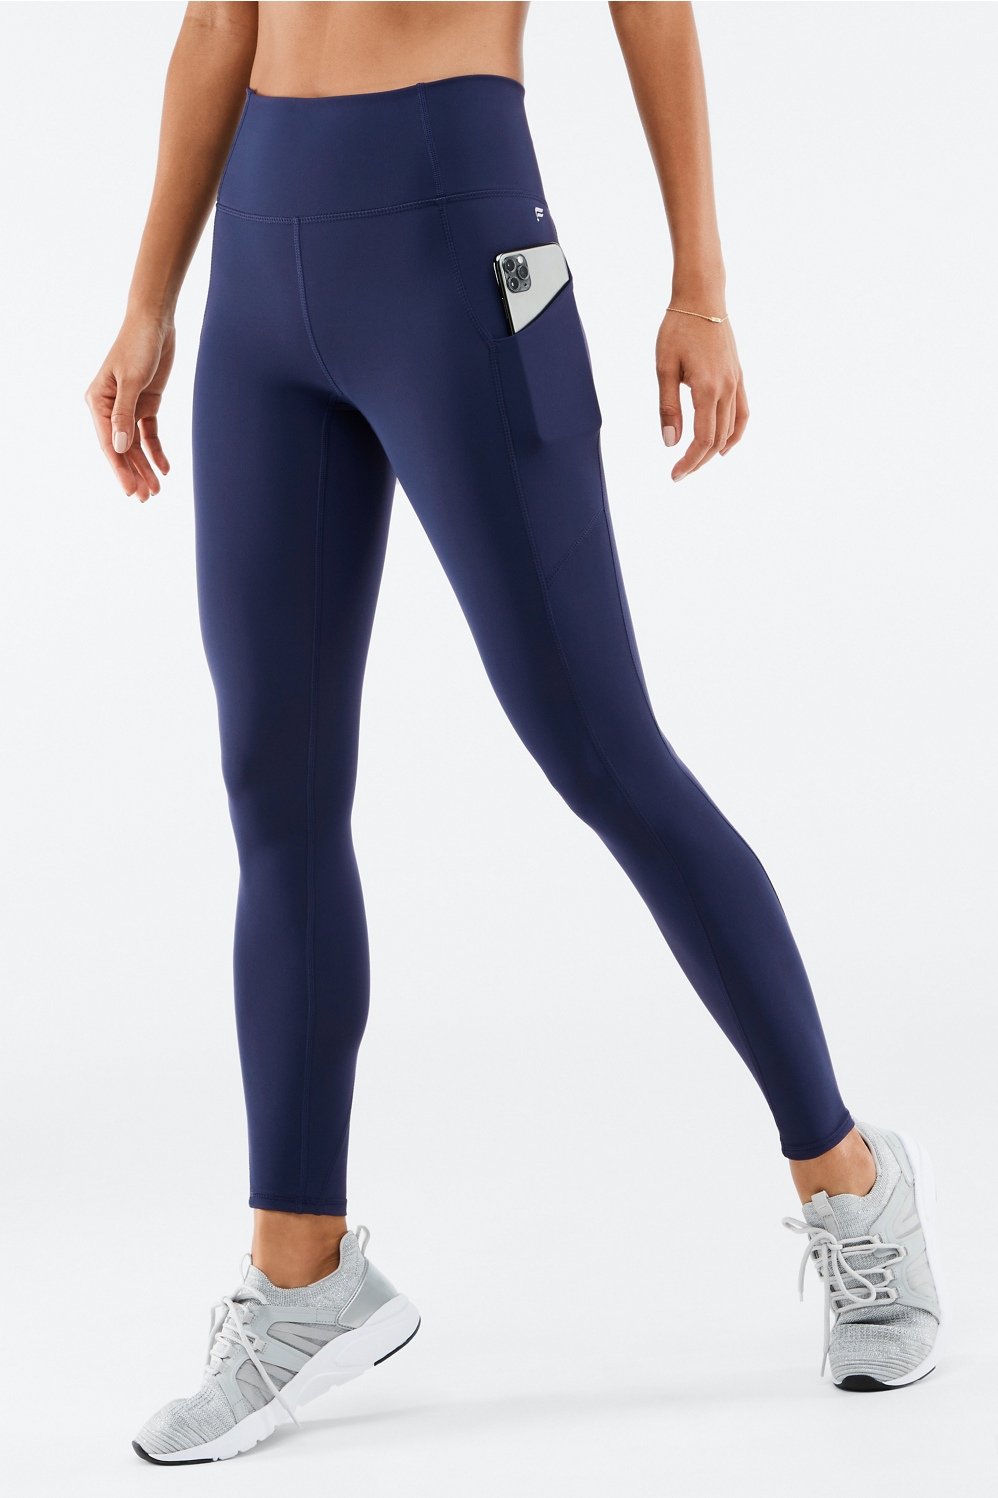 Fabletics Oasis High-Waisted Pocket 7/8 Legging Abyss LG2041751 Size XSmall